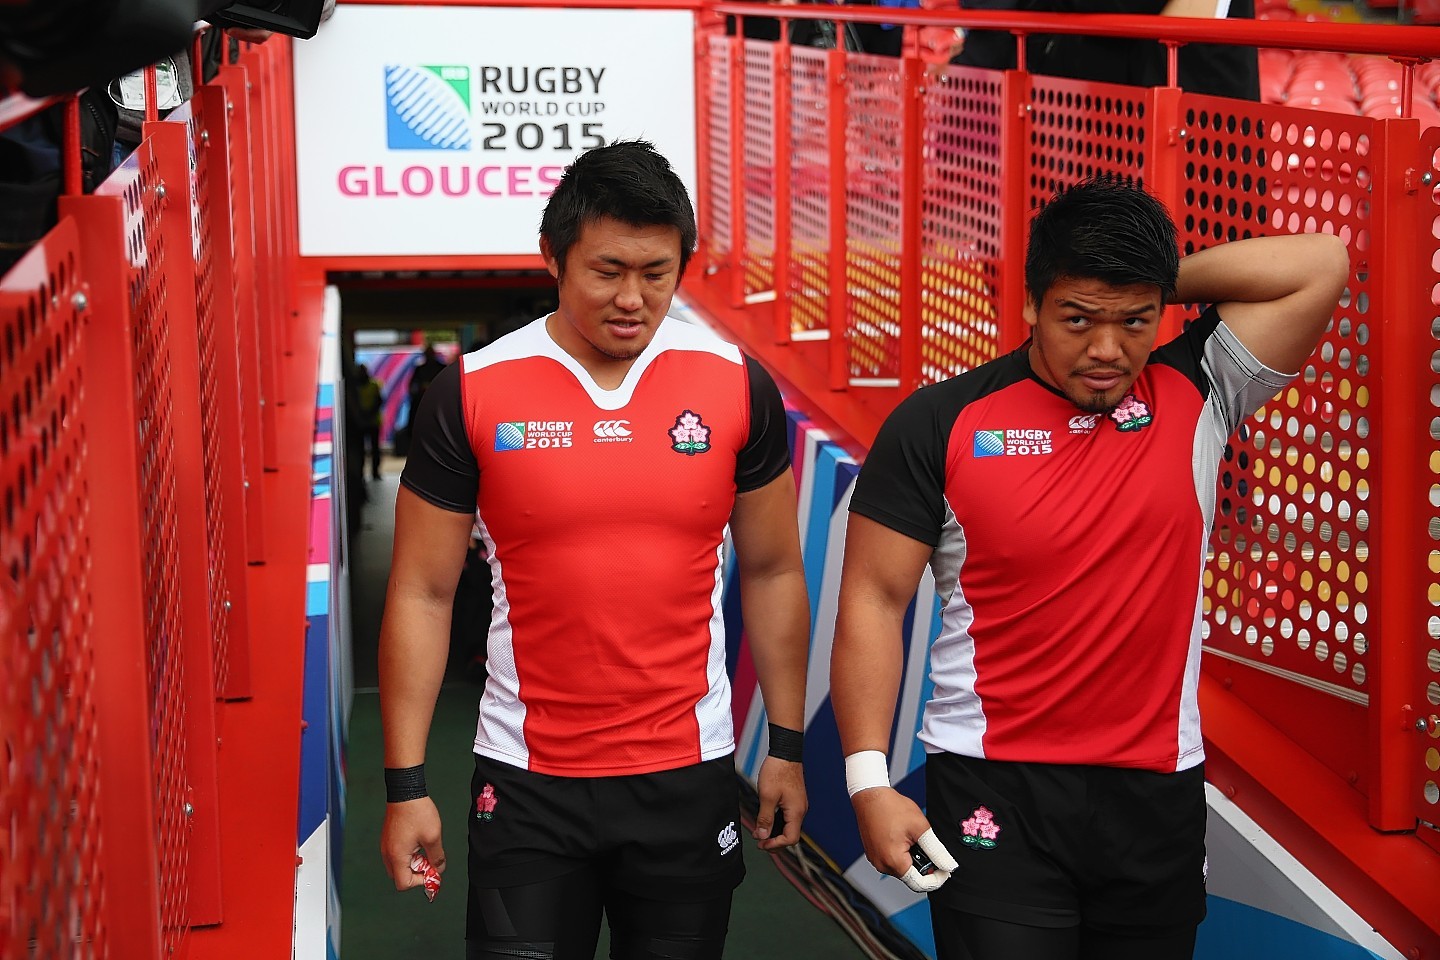 Shinya Makabe (L) and Takeshi Kizu (R) of Japan head towards the pitch from the dressing rooms during the Captain's Run ahead of the Japan versus Scotland Pool B match at Kingsholm Stadium